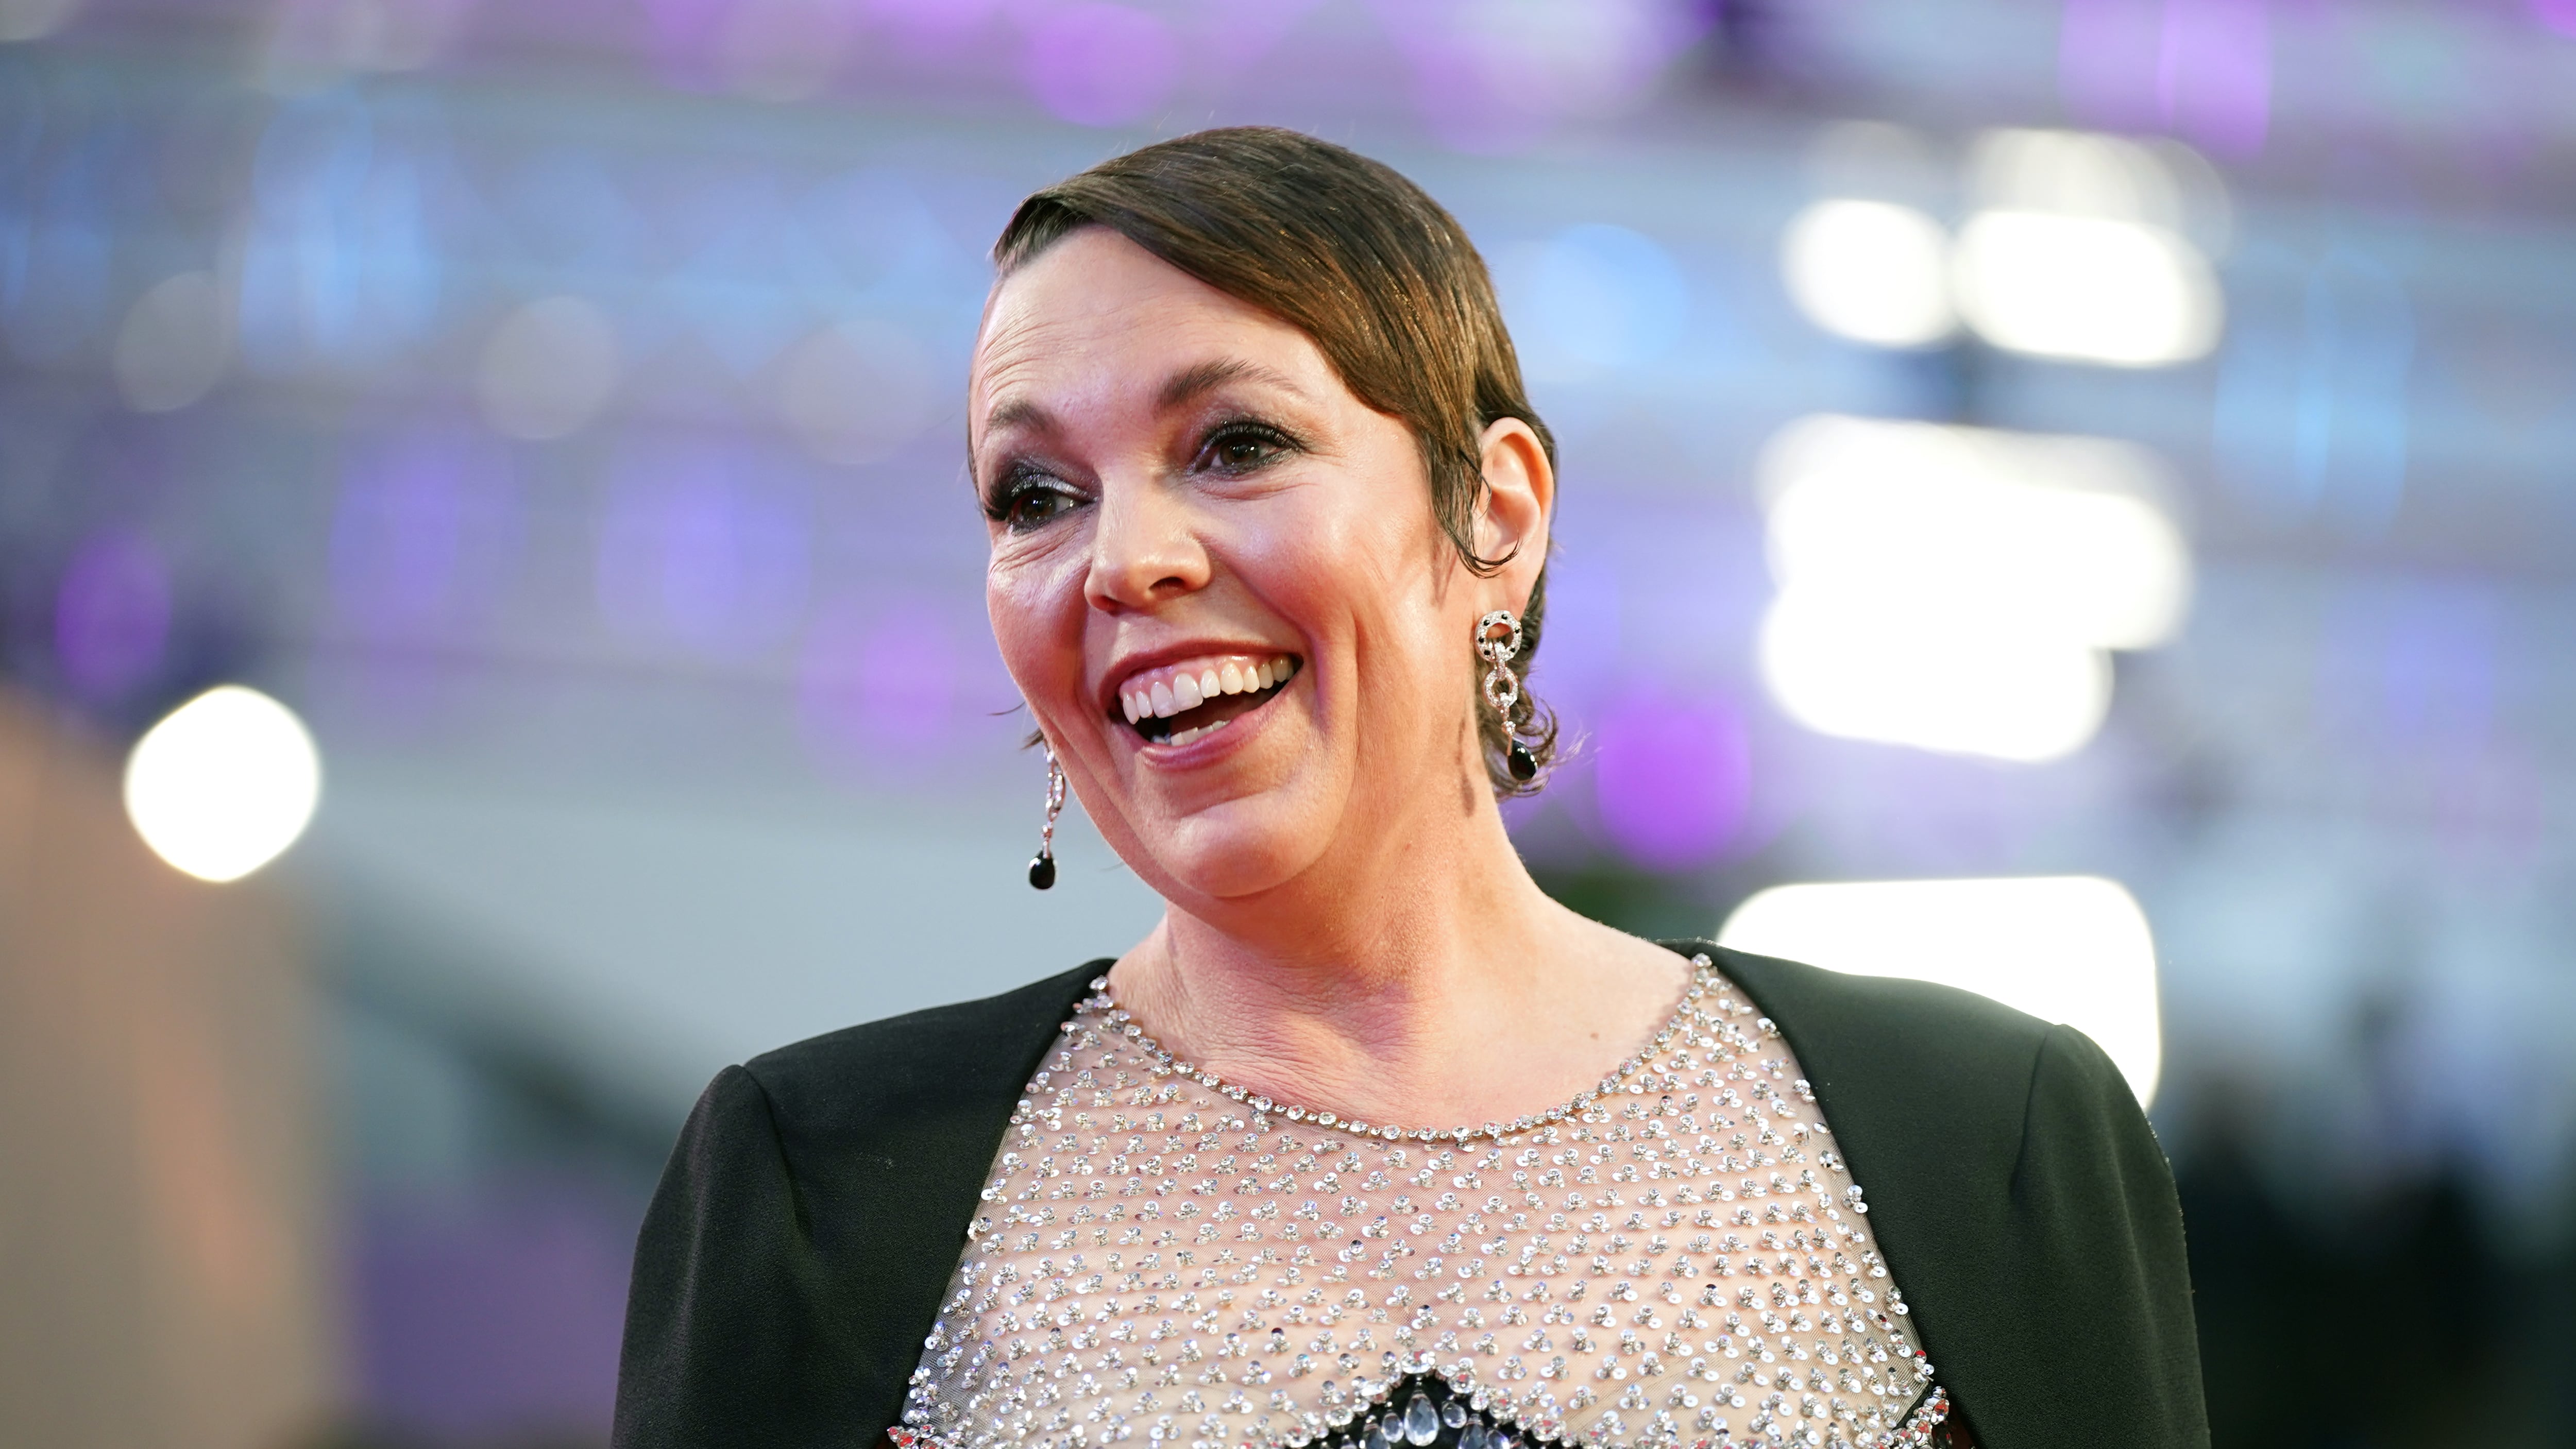 Olivia Colman has said she would be paid more if she was a man